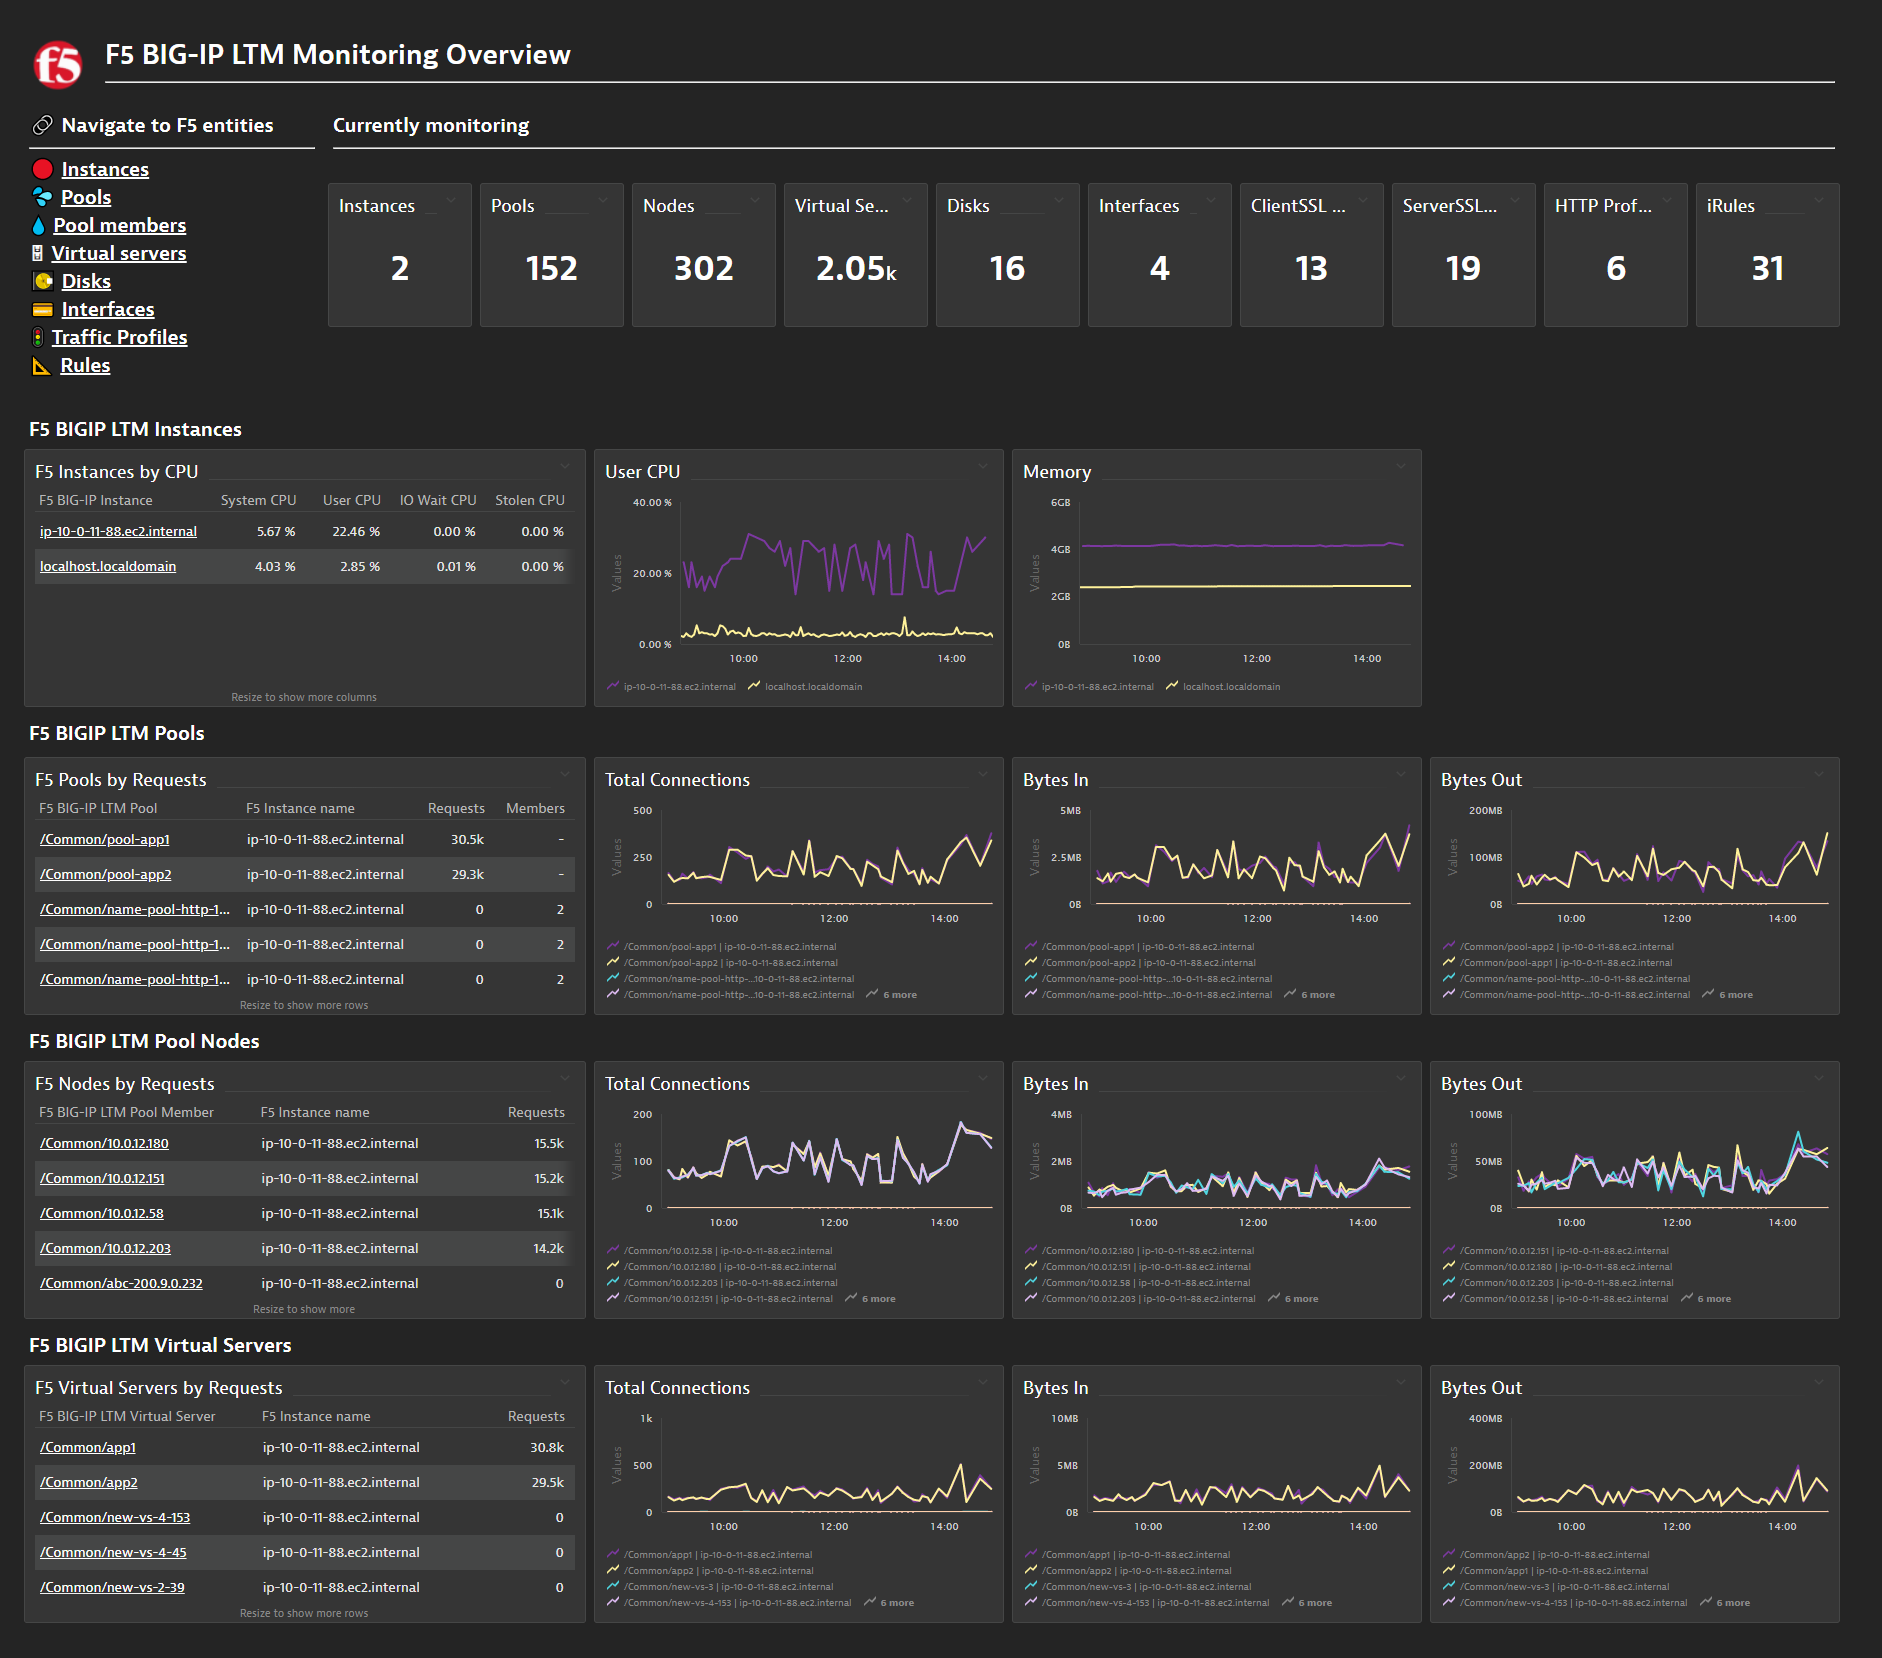 Example of an automatically generated dashboard for F5 instances.